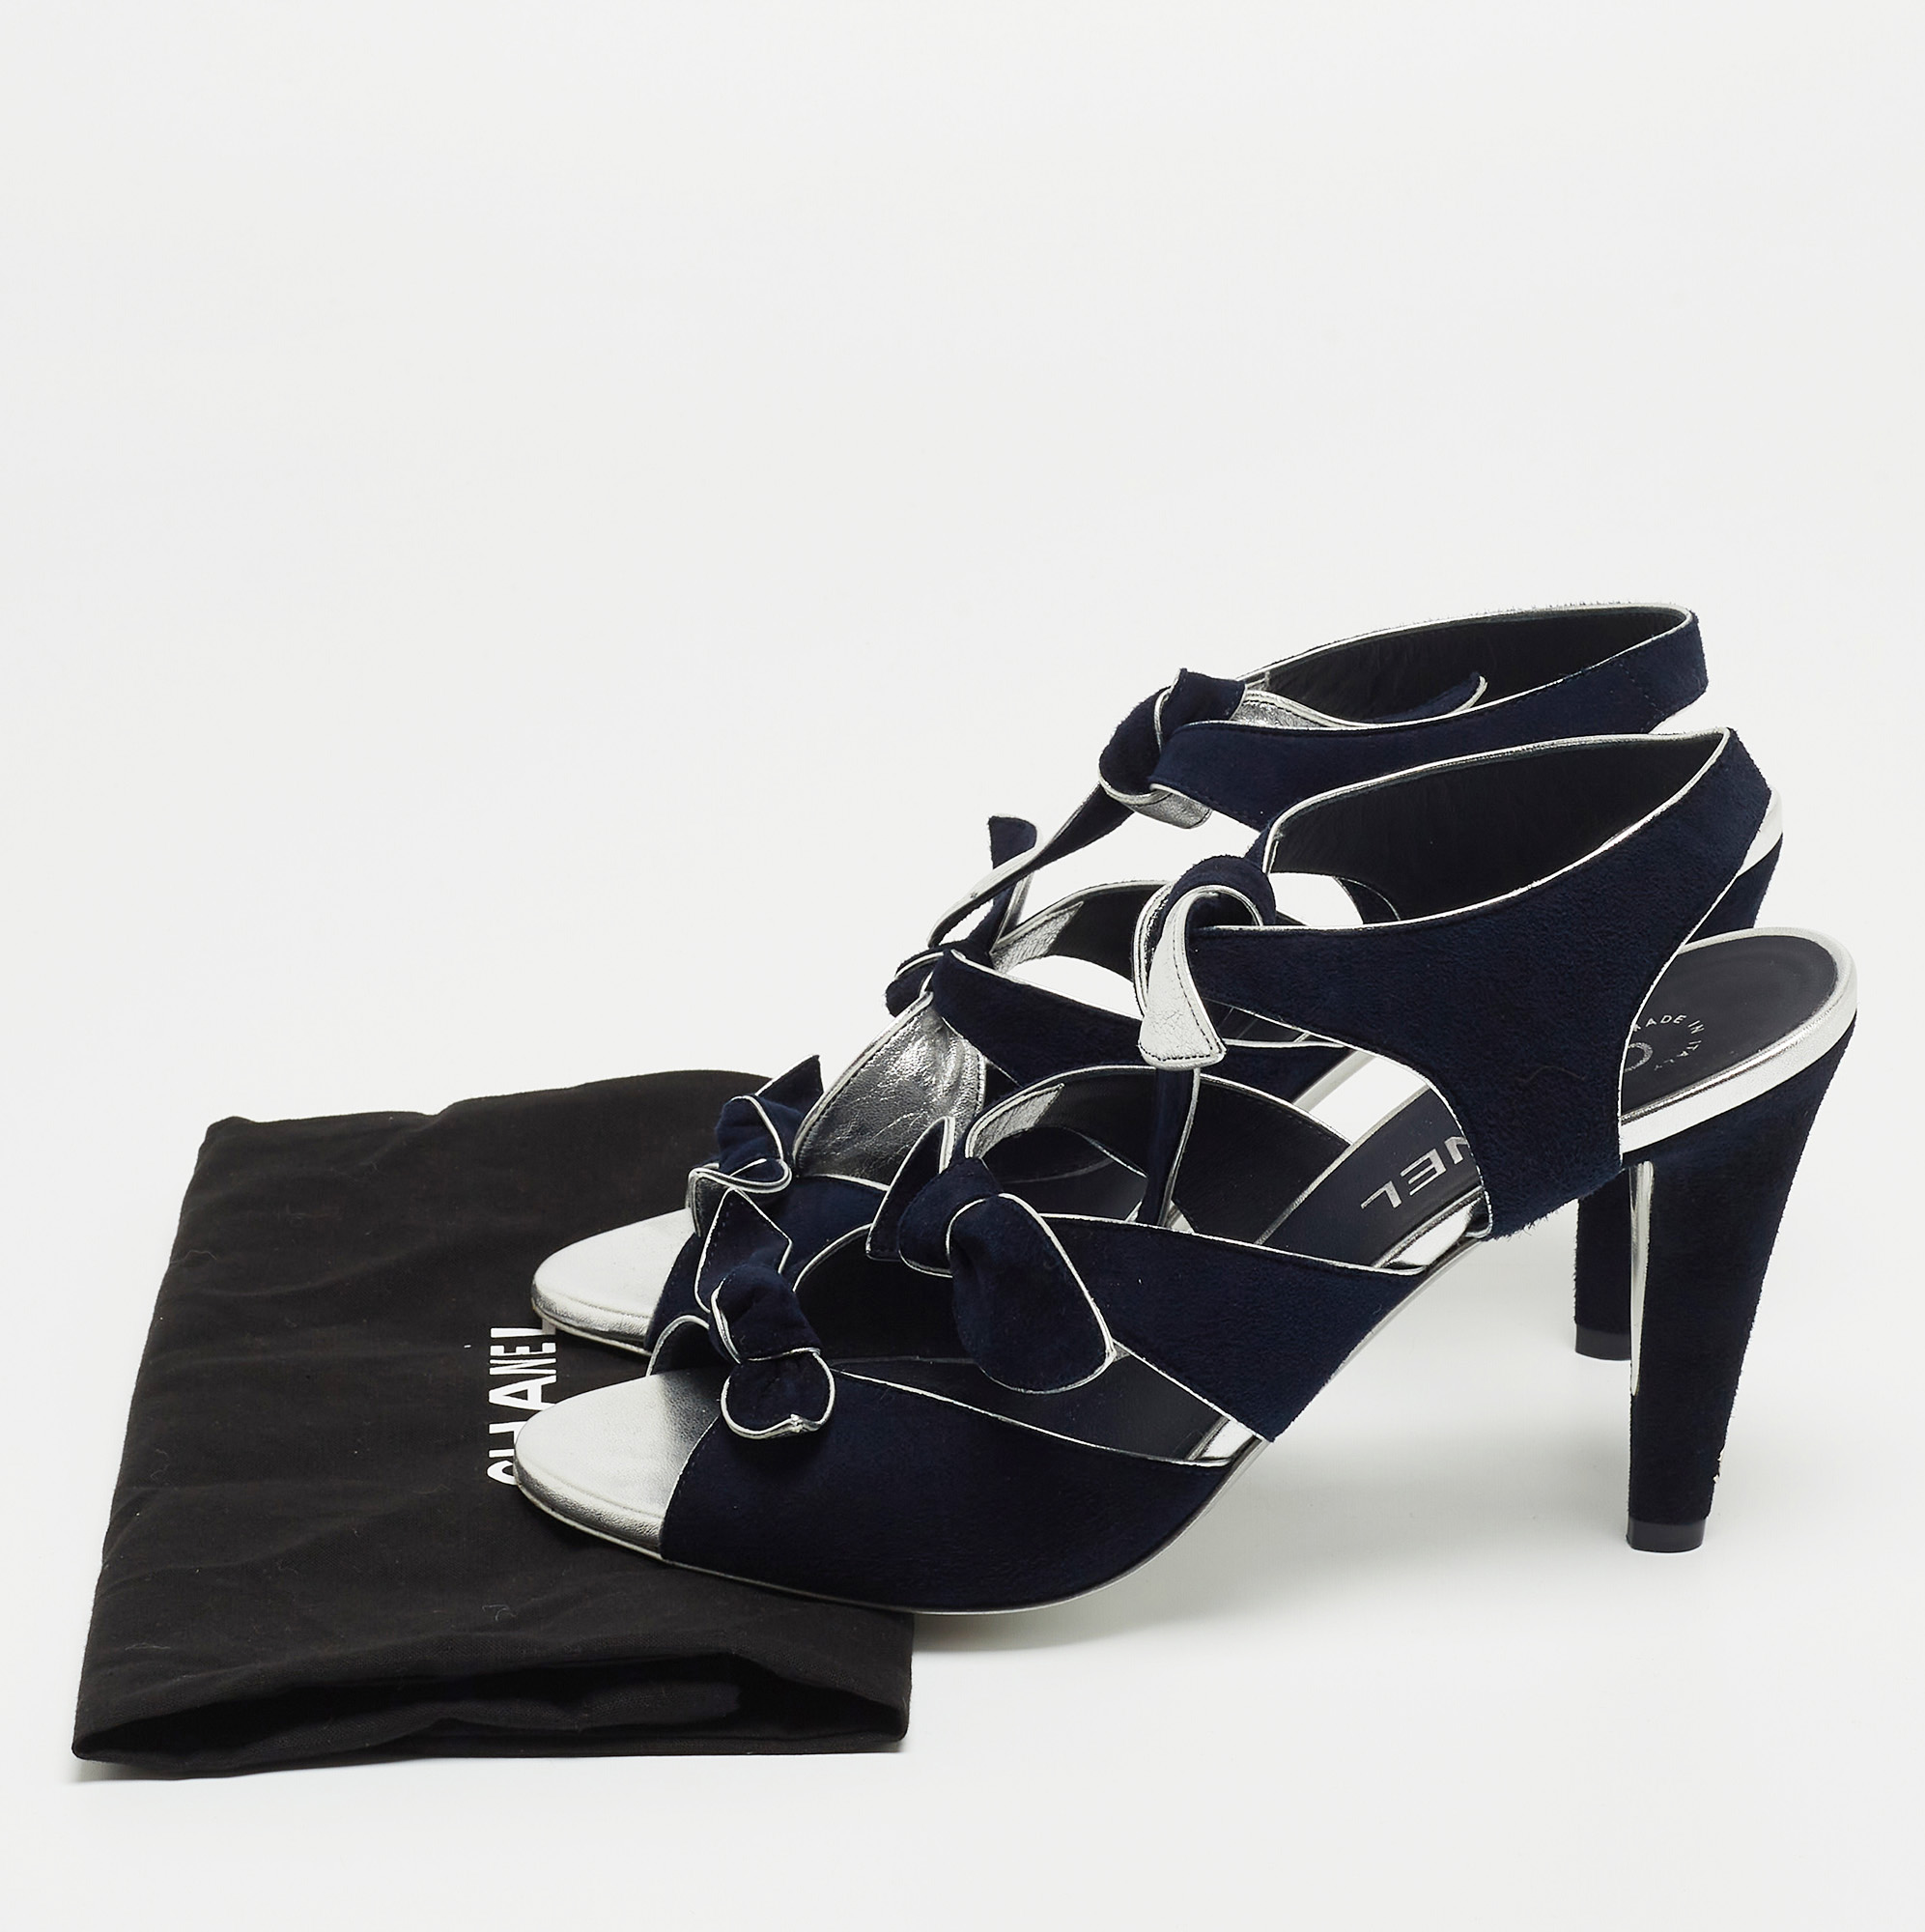 Chanel Navy Blue Suede Knotted Bow Ankle Strap Sandals Size 39